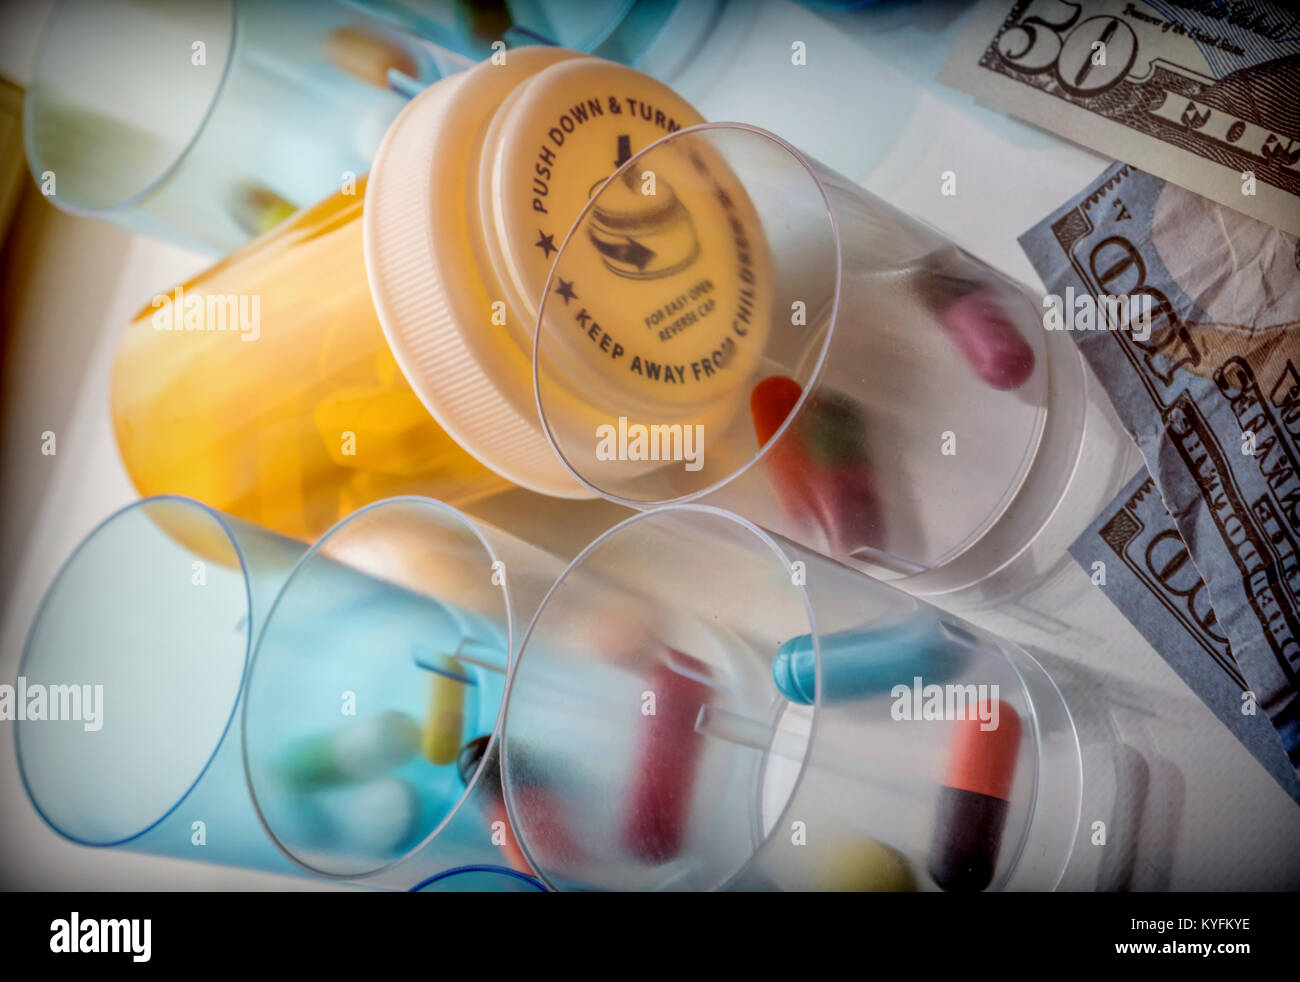 Some medicines next to a block of tickets of dollar, conceptual image Stock Photo